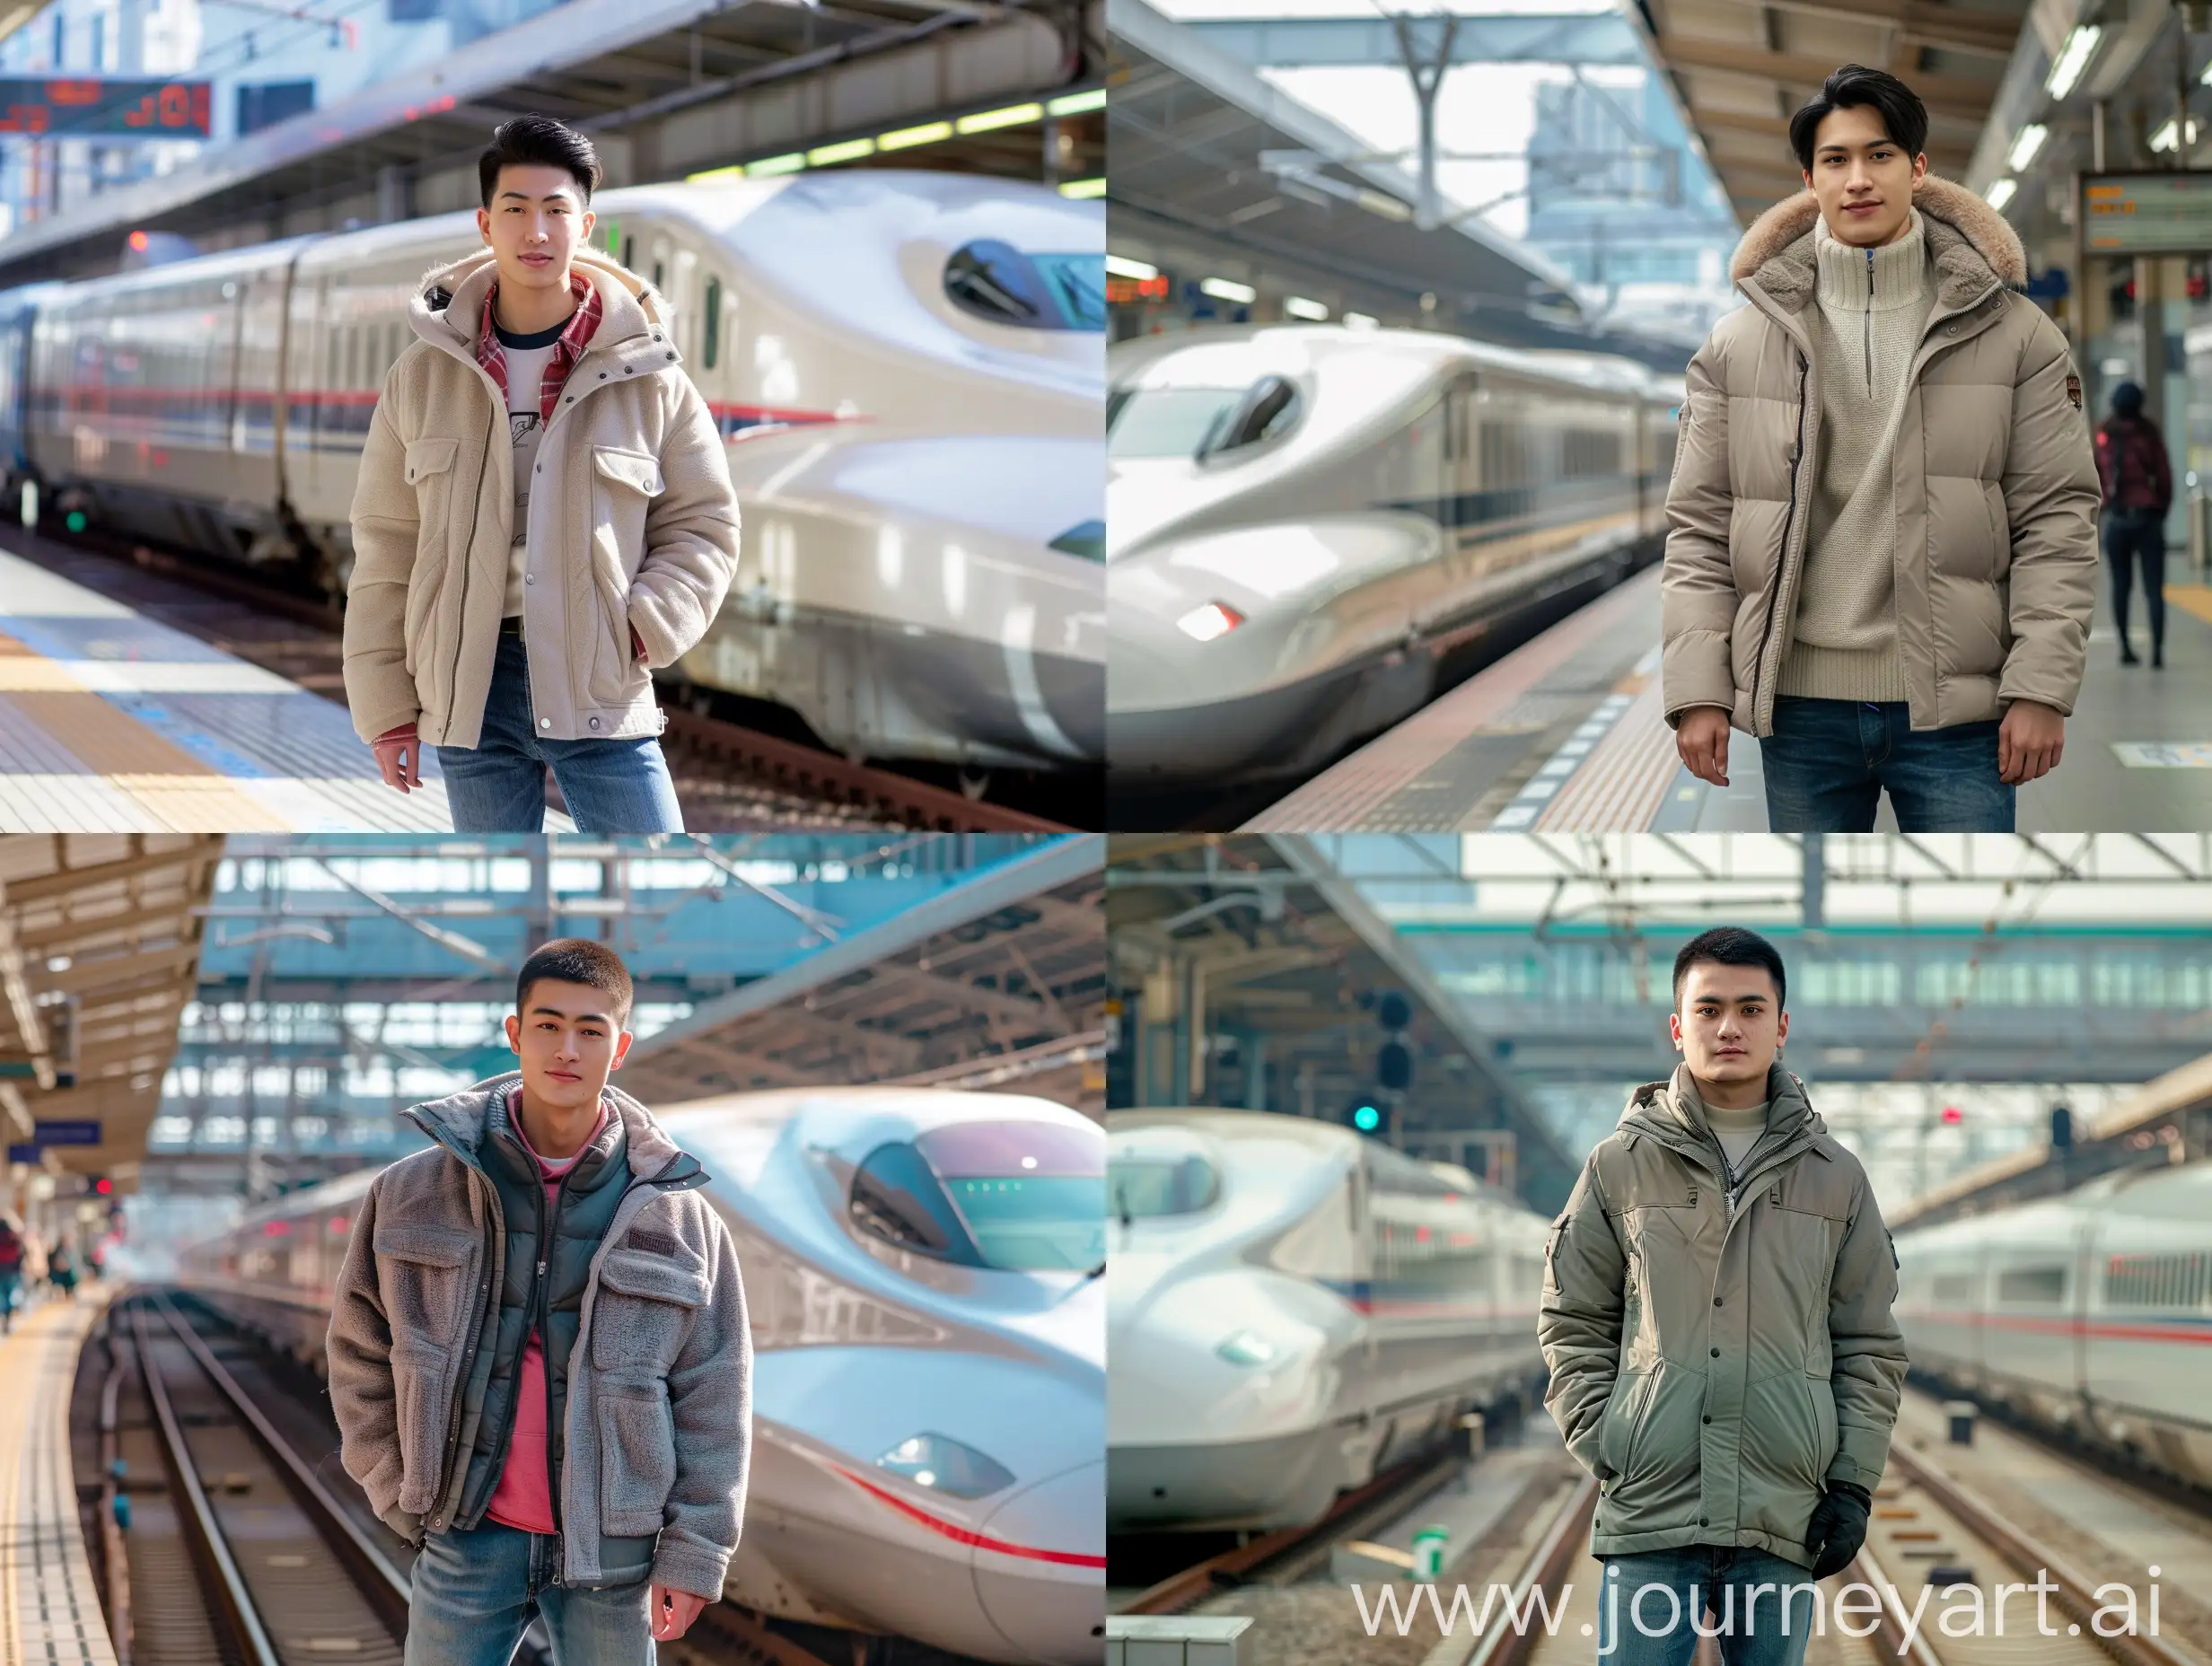 an charming Thailand man (25 years old, oval and clean face, formal hair, thin body, wearing a thick winter jacket, jeans) standing posing like a model in front of Shinkansen (bullet trains): Japan is known for its high-speed trains, such as the Shinkansen, which can travel at speeds of up to 200 miles per hour.